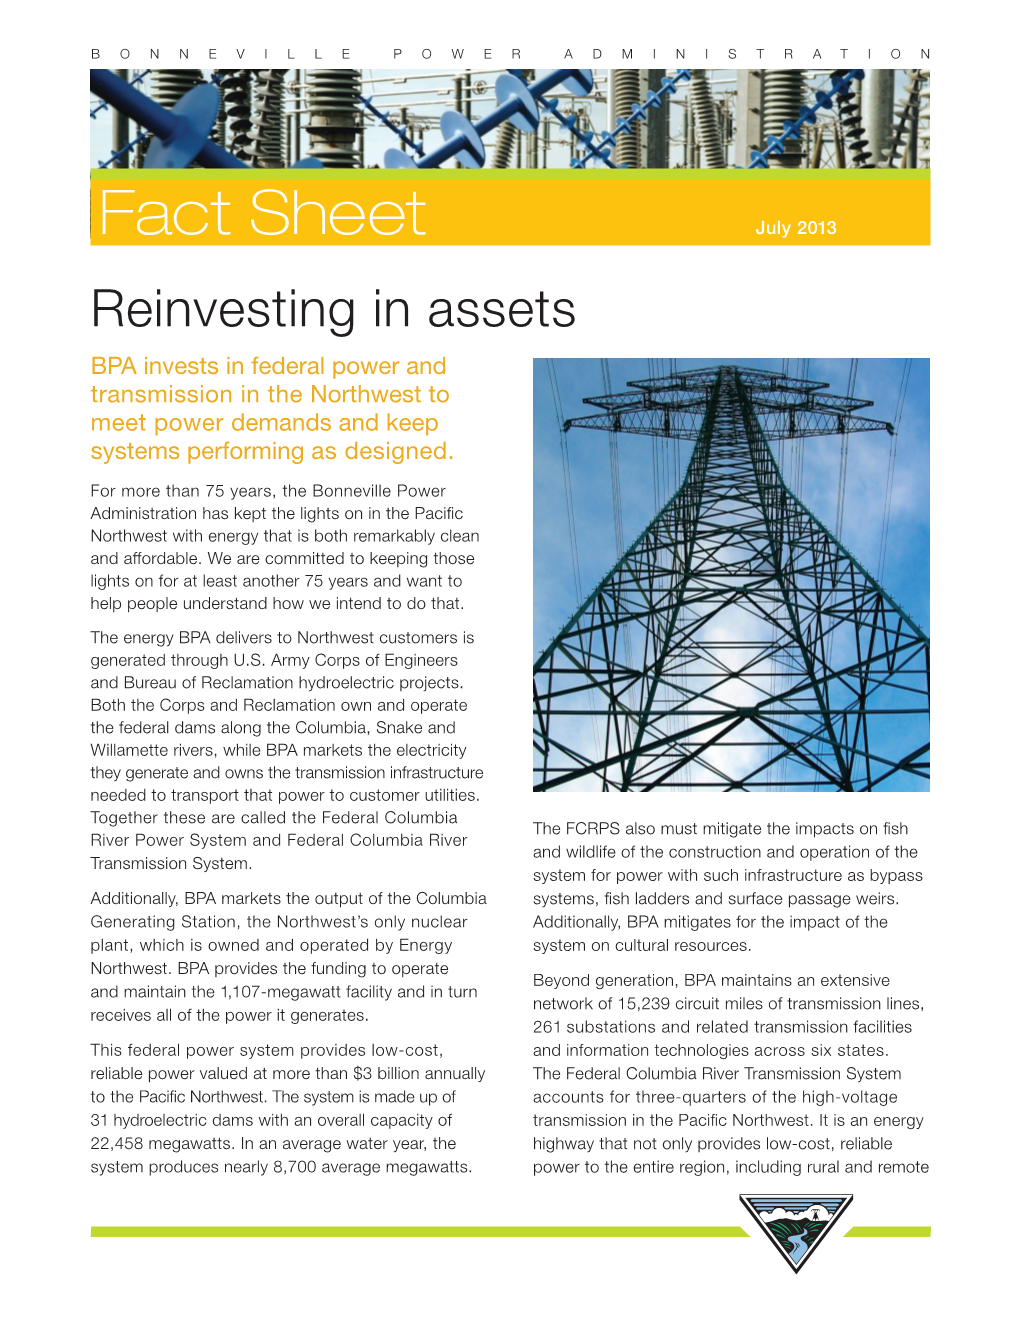 July 2013 Reinvesting in Assets BPA Invests in Federal Power and Transmission in the Northwest to Meet Power Demands and Keep Systems Performing As Designed